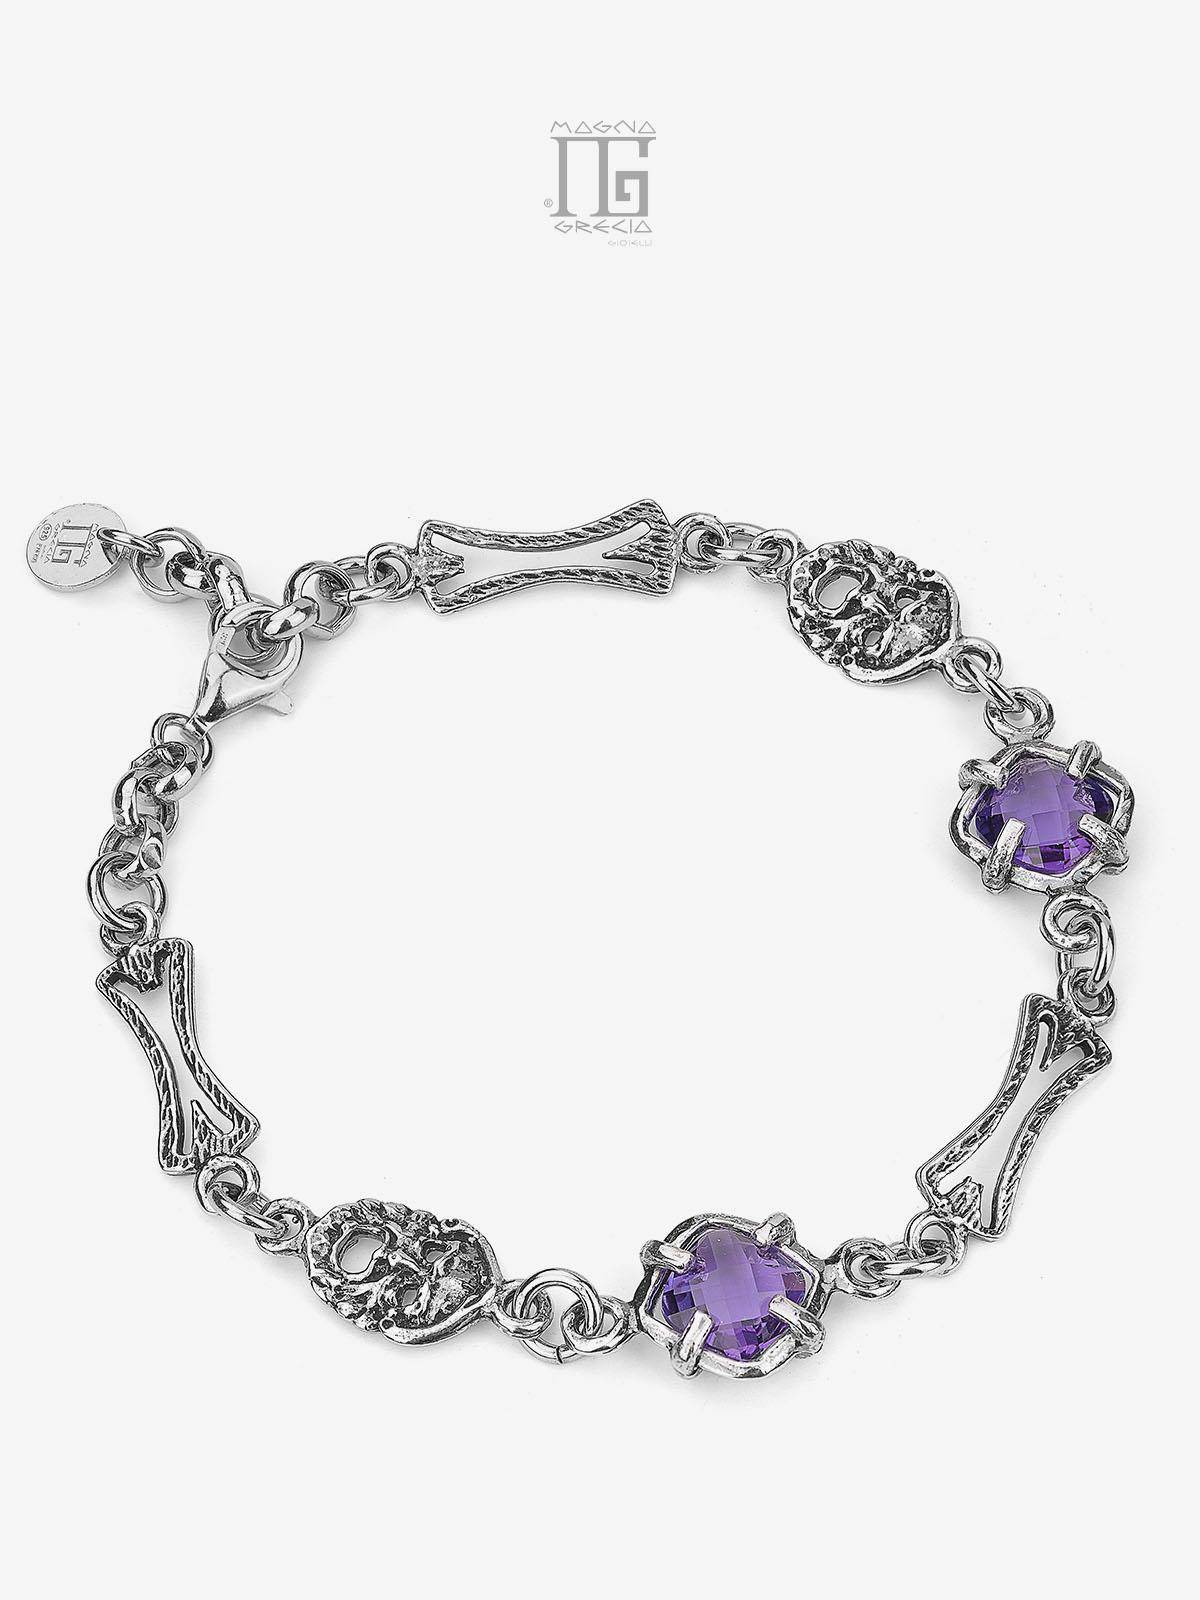 Silver Bracelet with Apotropaic Masks and Hydrothermal Stones Purple Amethyst Color Code MGK 4110 V